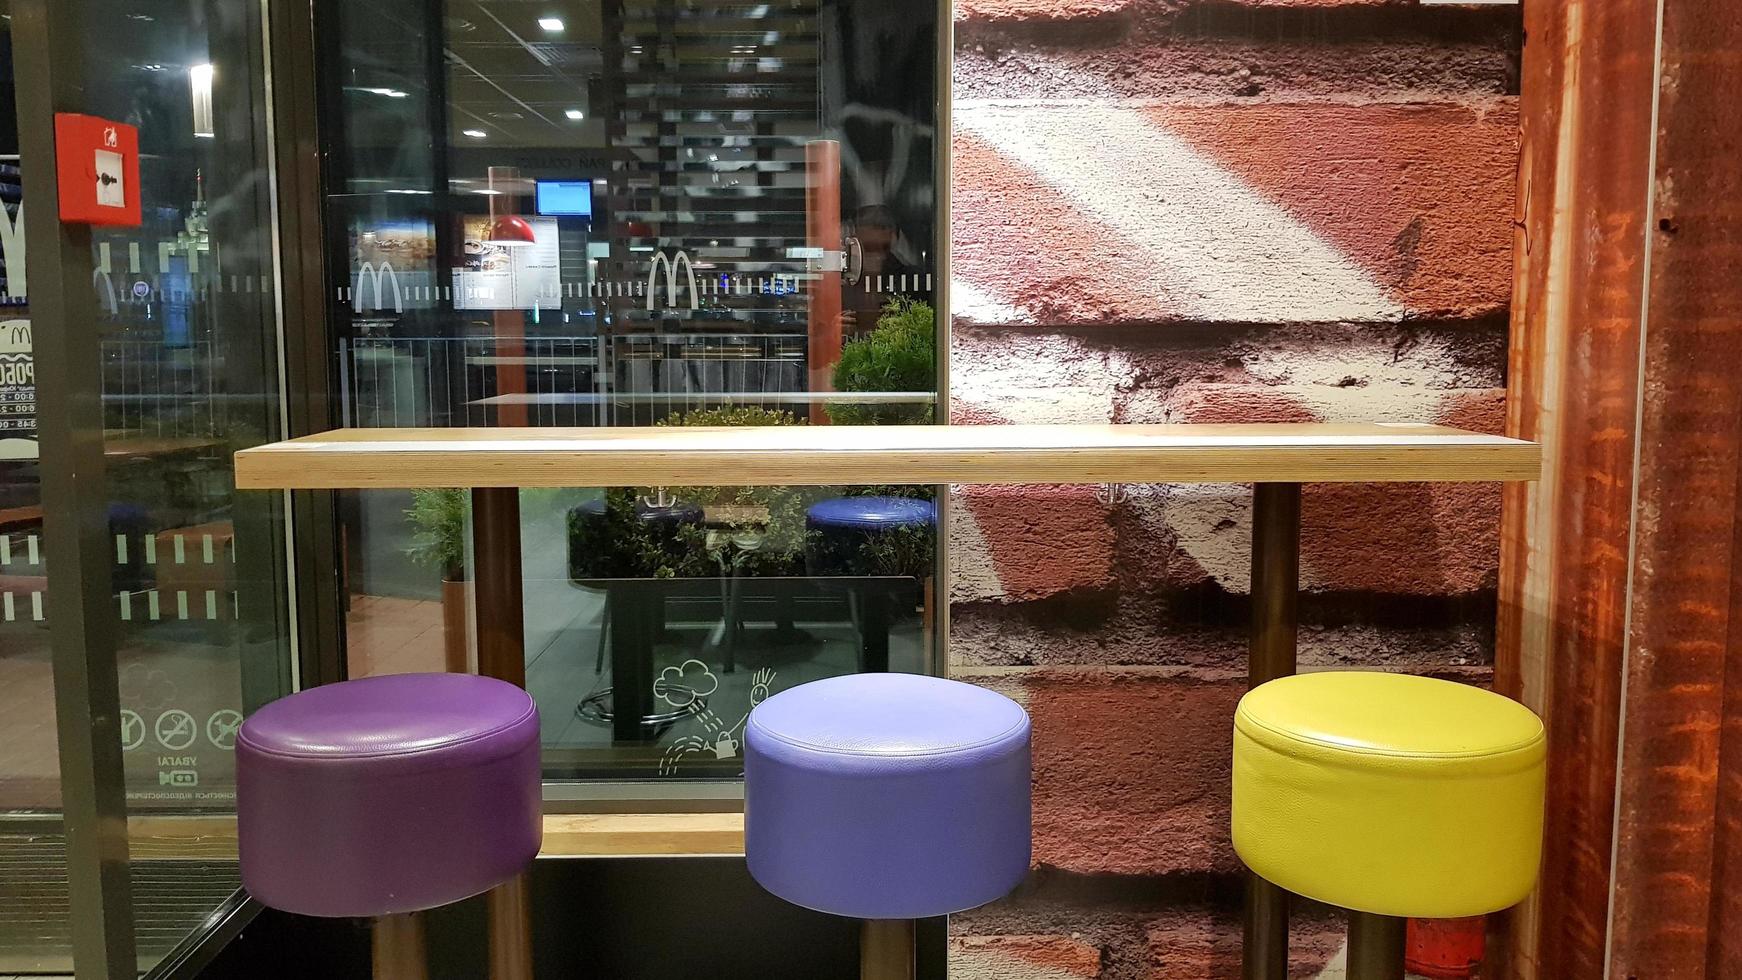 Ukraine, Kiev - August 19, 2019. McDonald's restaurant interior. McDonald's is the world's largest fast food restaurant chain based in the USA. Interior with tall tables and colored bar stools photo